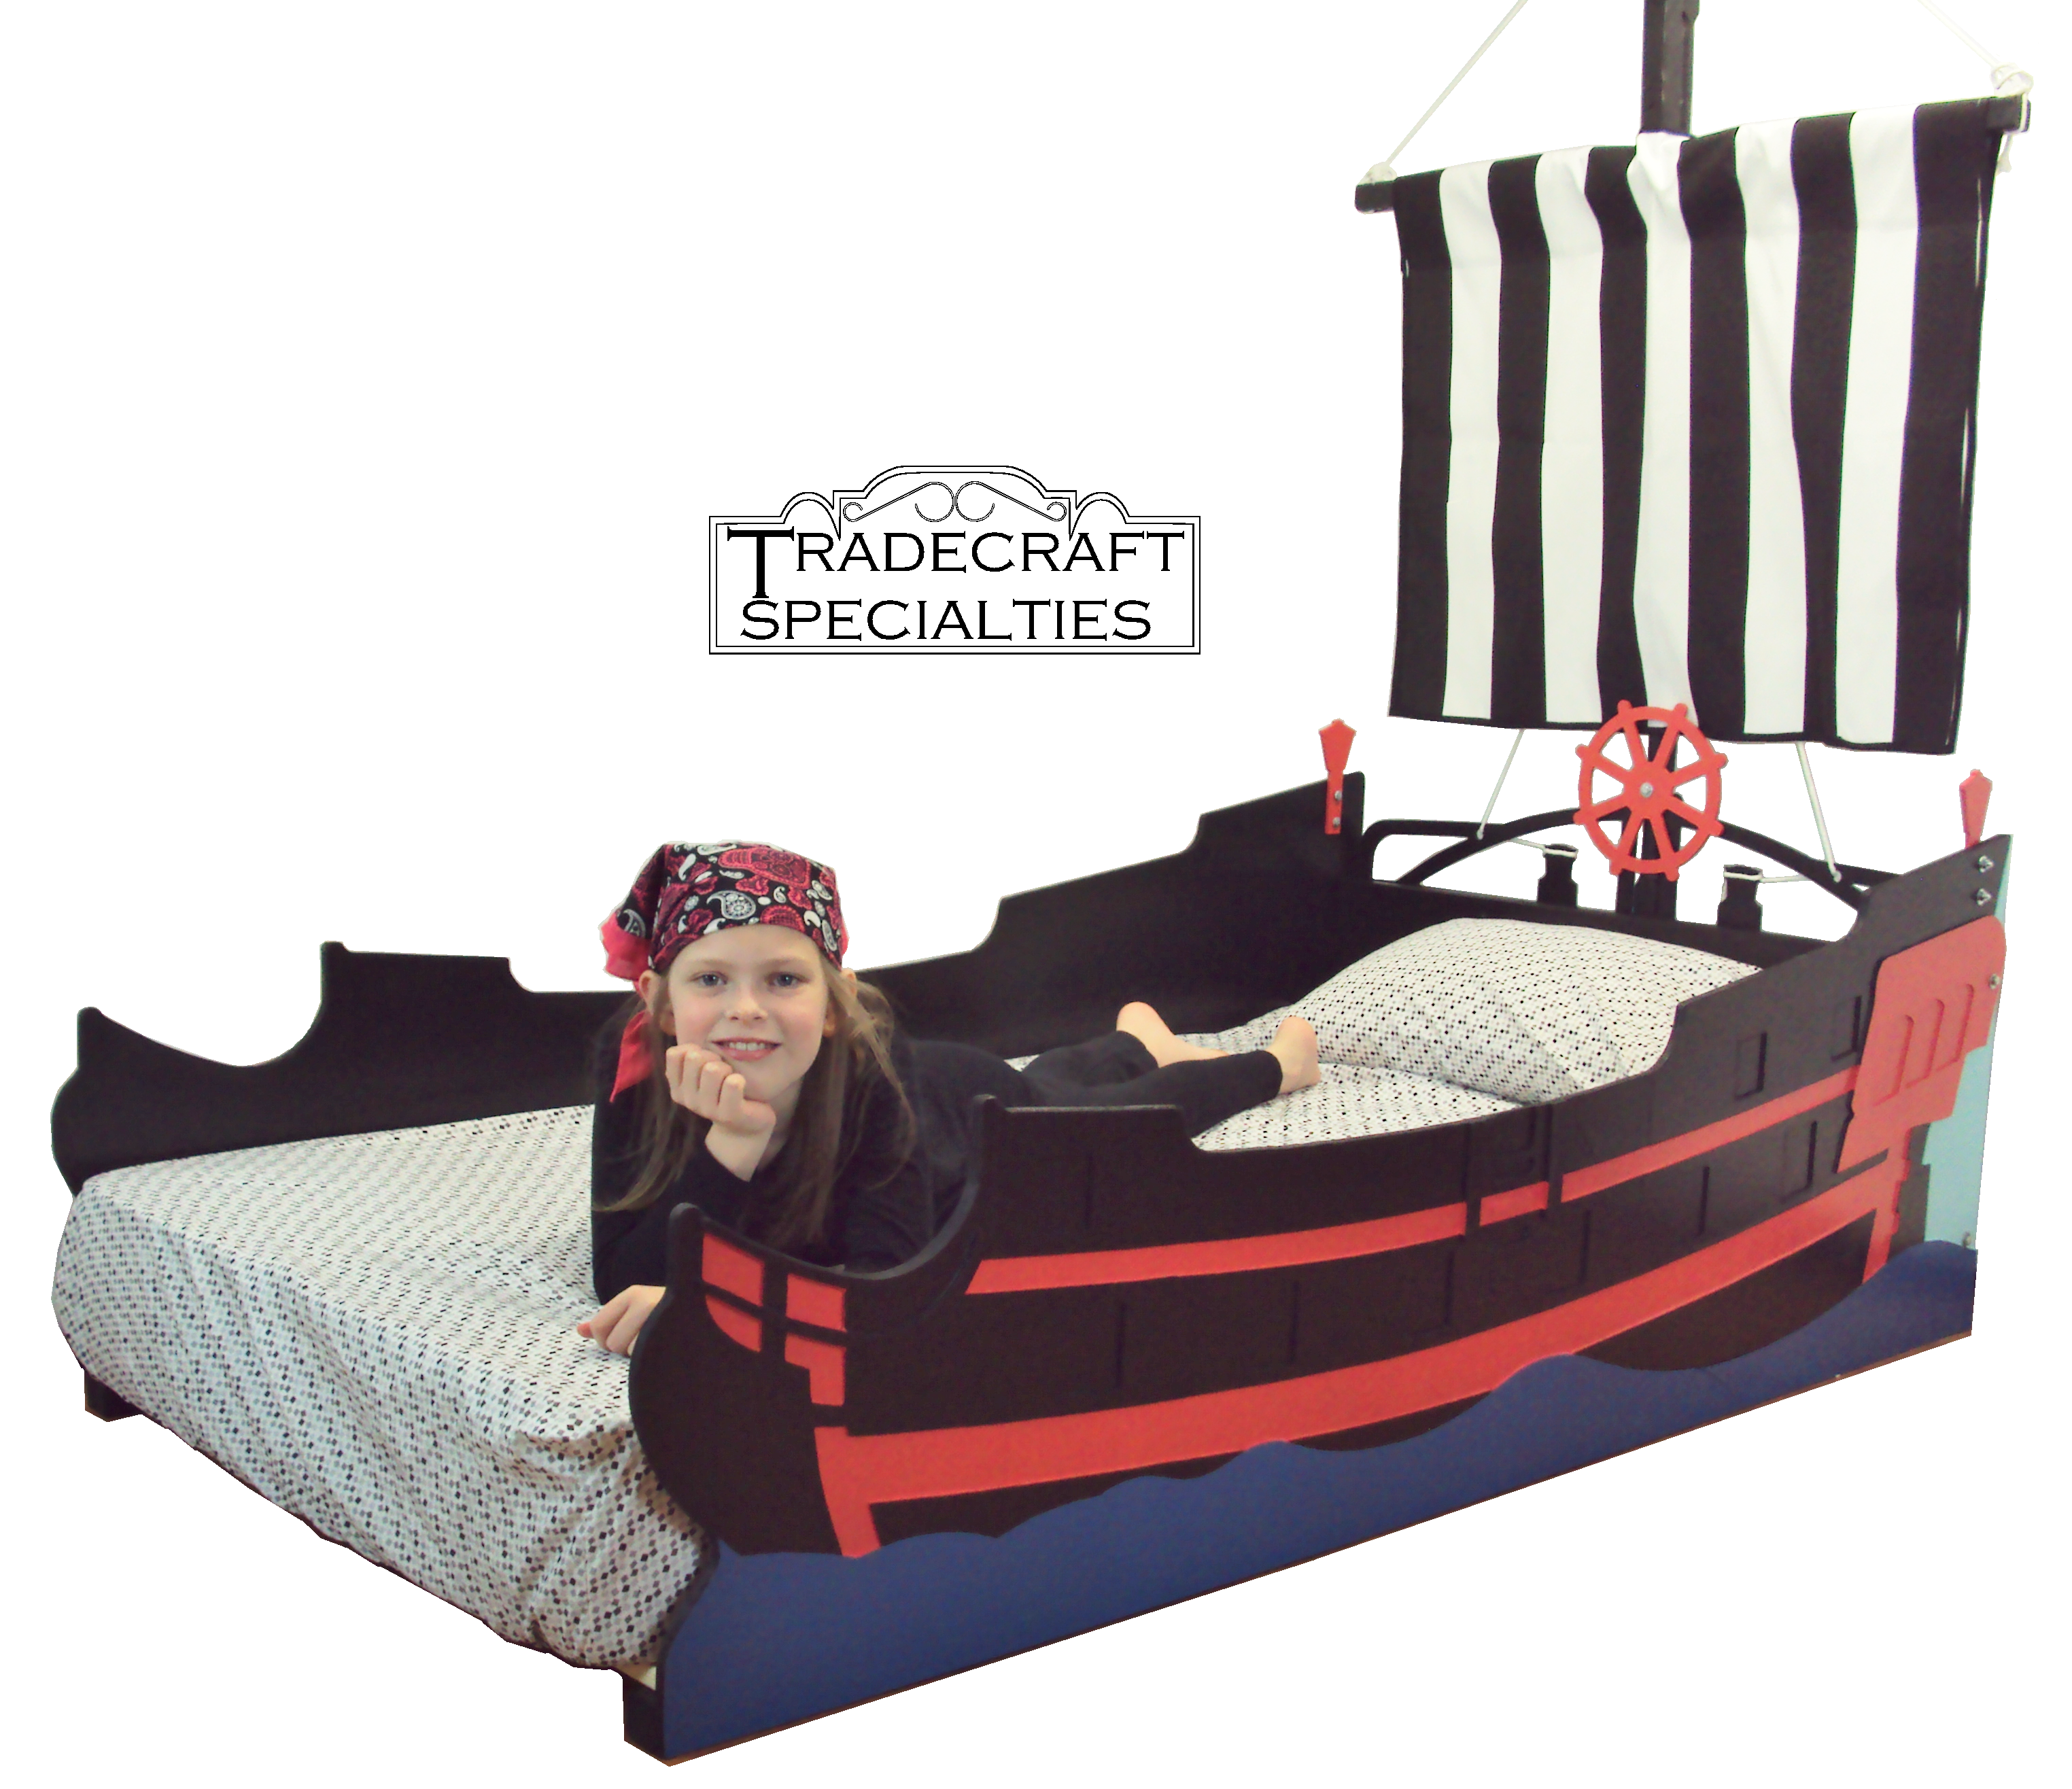 Jf2021 Pirate Bunk Bed Aysultancandy Com, Pirate Bed Tent Twin